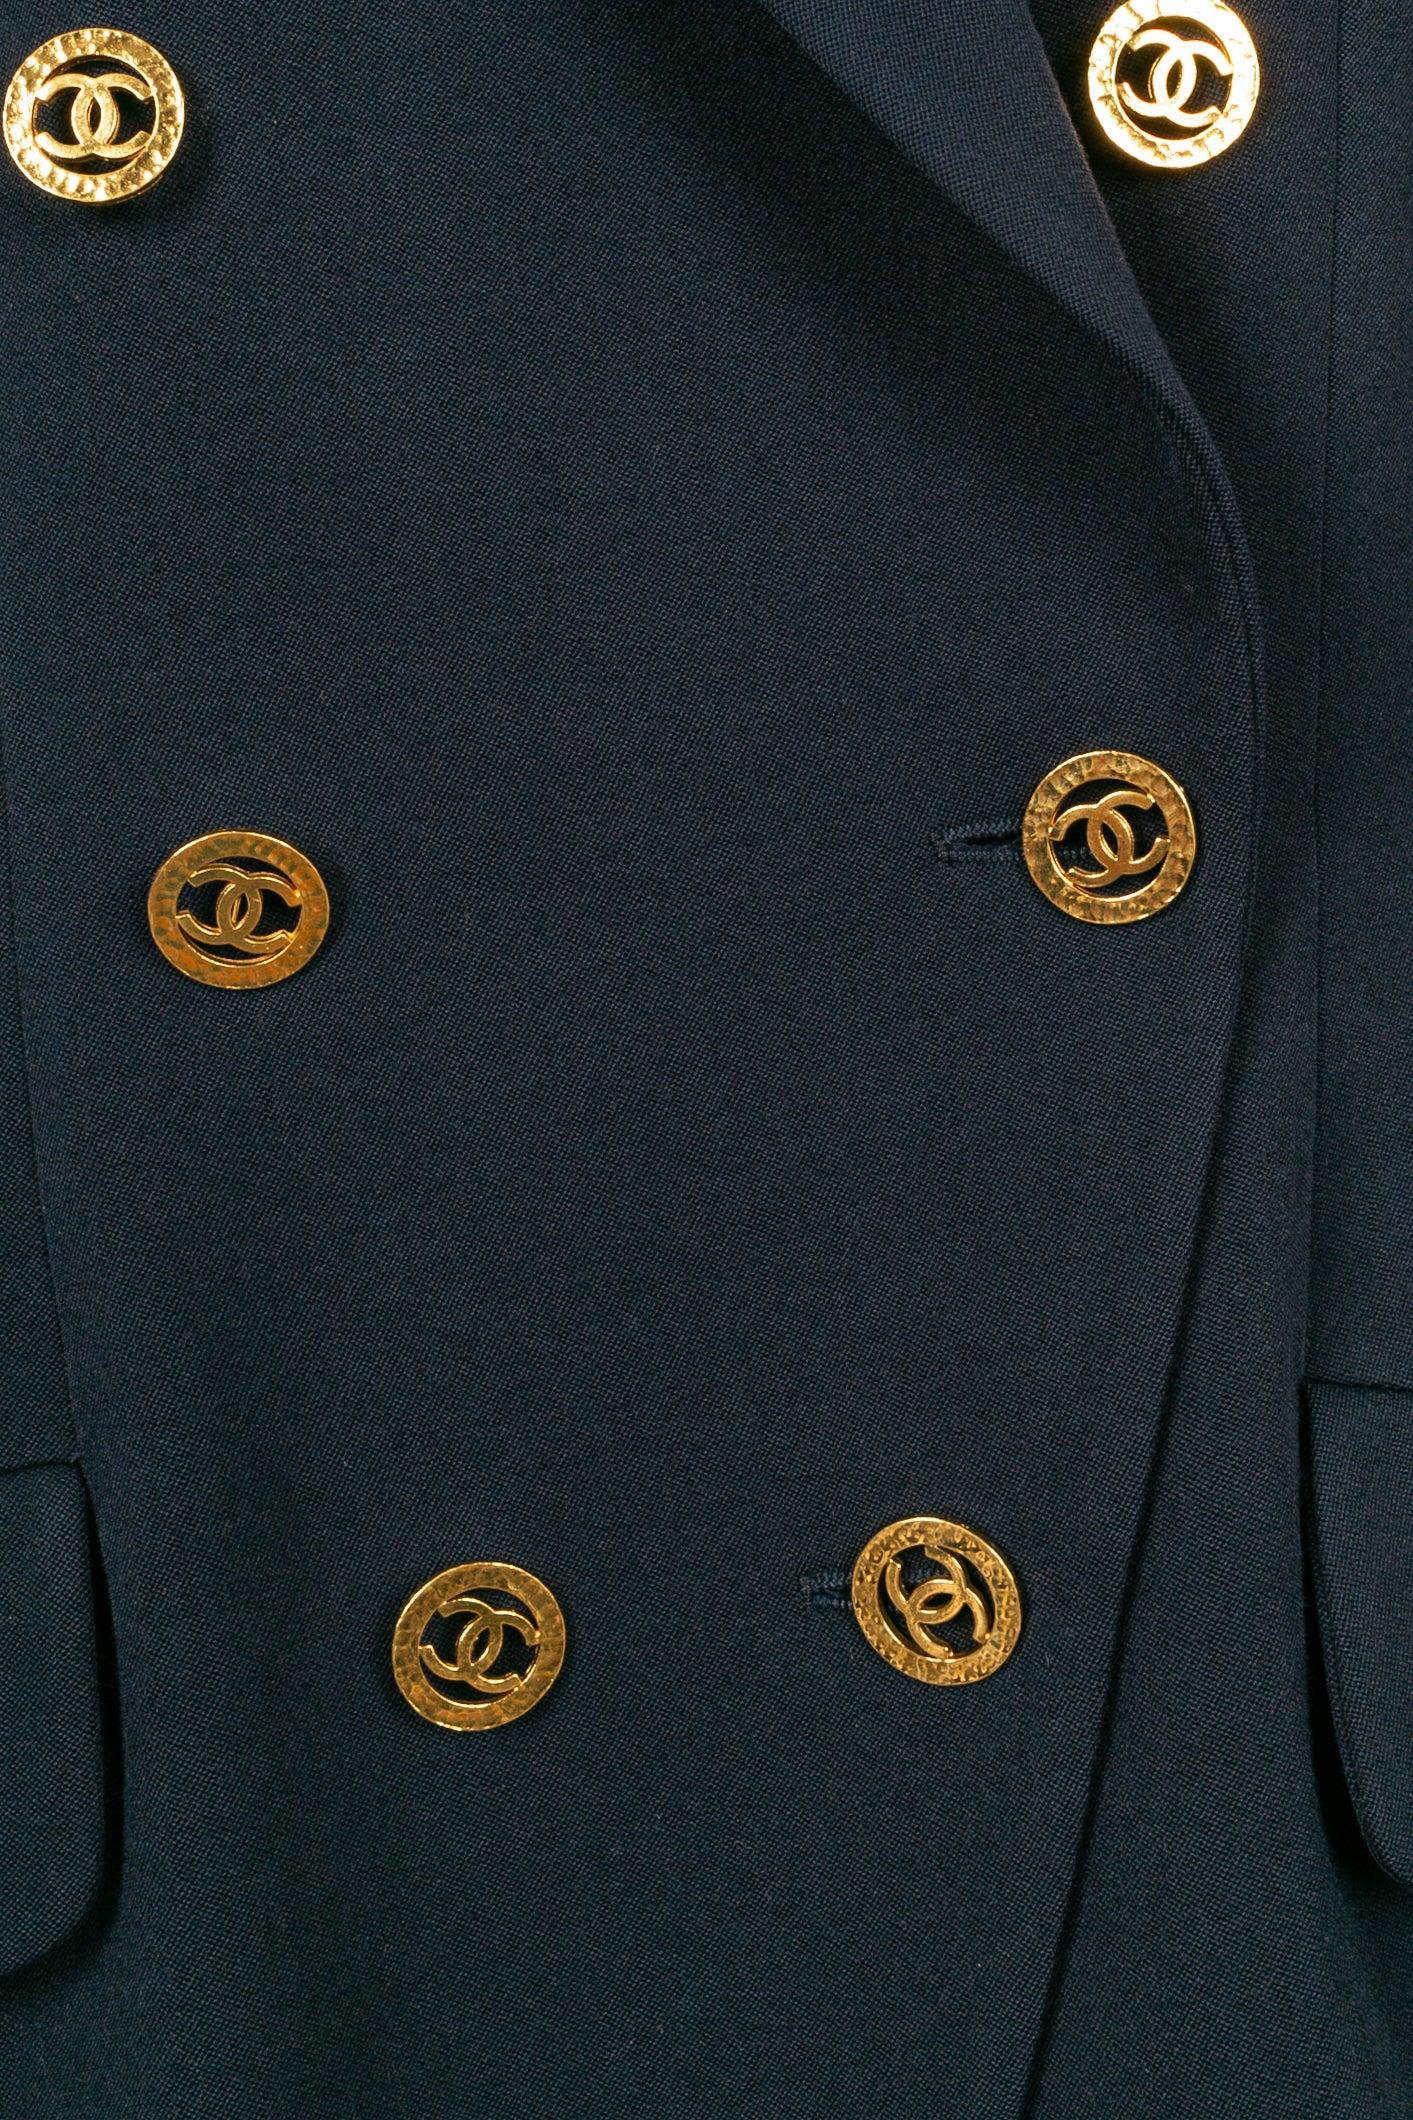 Chanel Navy Blue Wool Jacket with a Silk Lining, 1990s For Sale 4